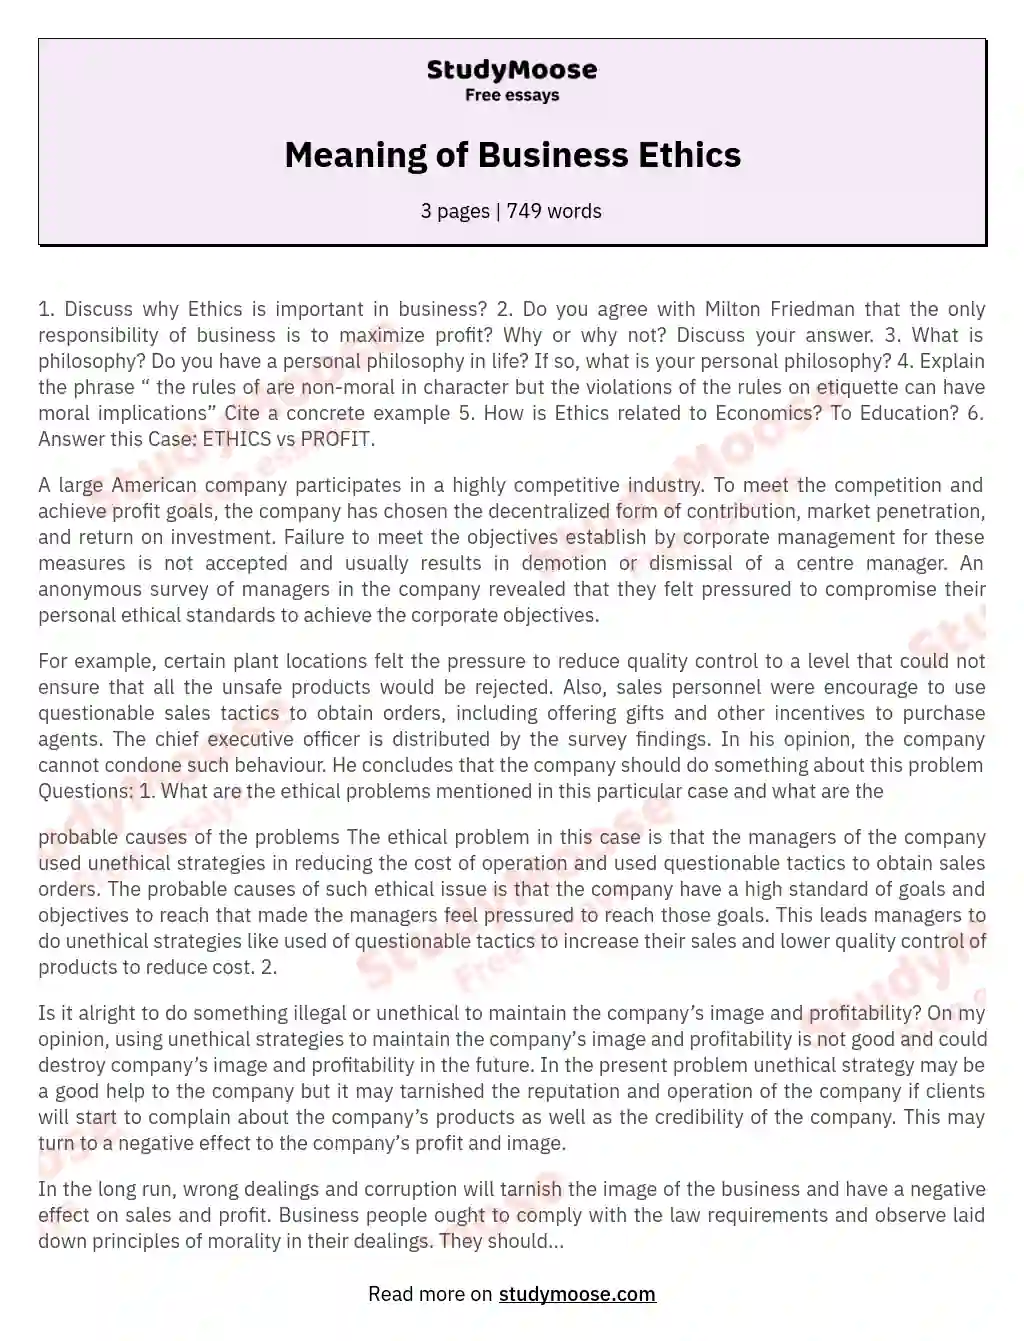 Meaning of Business Ethics essay